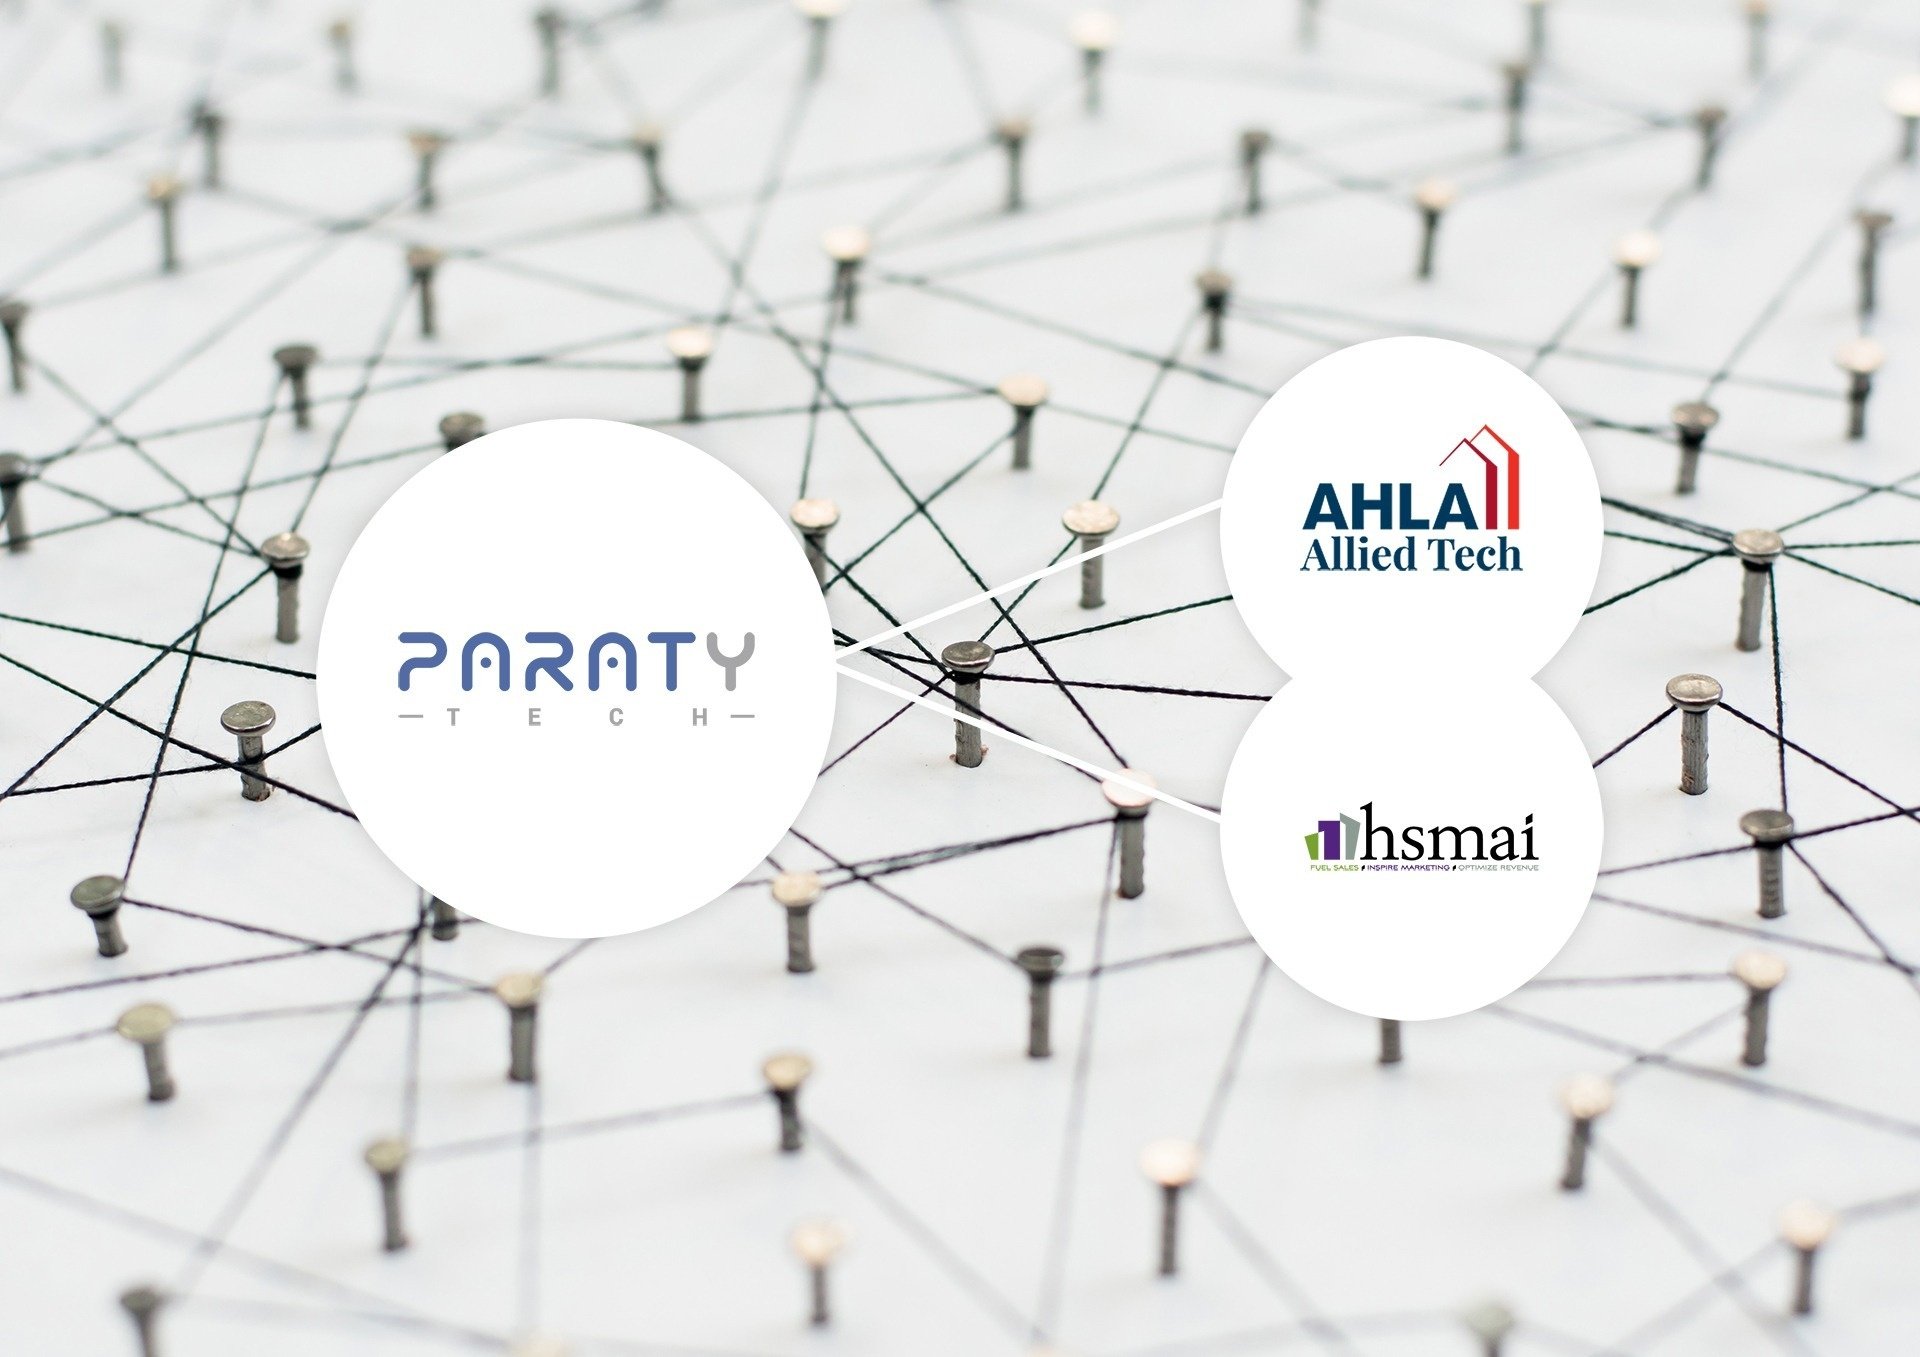 Paraty Tech joins AHLA and HSMAI to drive innovation and fuel growth in U.S. hospitality sector